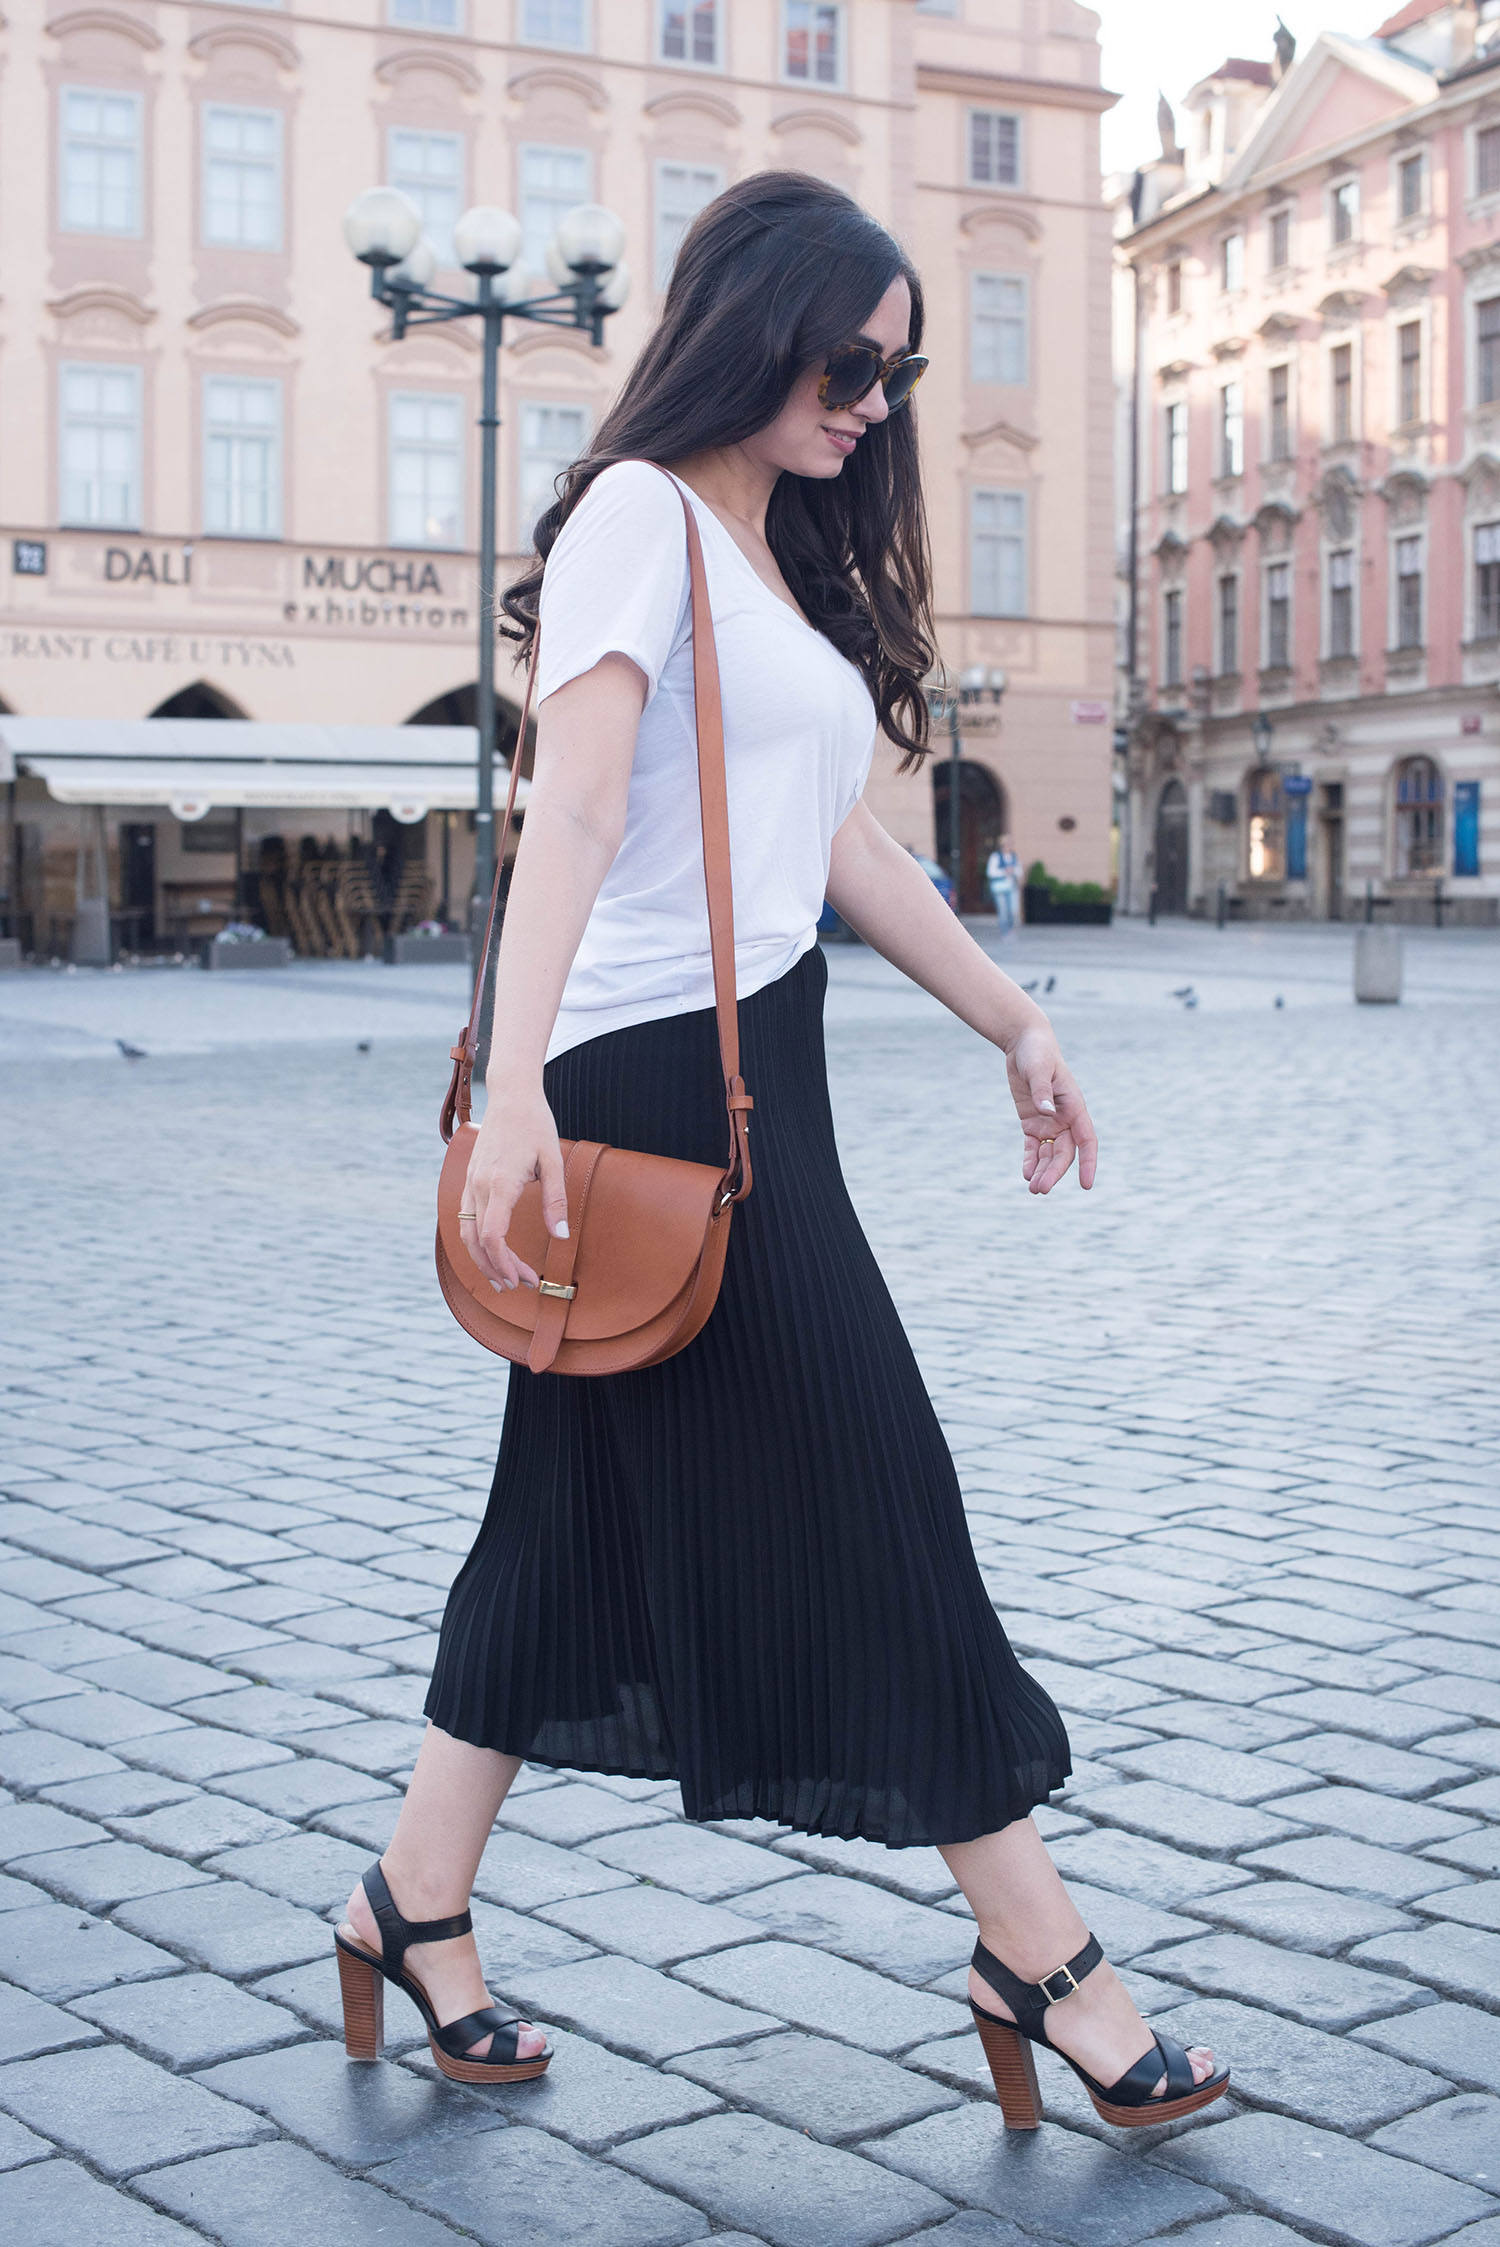 Canadian fashion blogger Cee Fardoe of Coco & Vera walks through Old Town Square in Prague carrying a Sezane Claude bag and wearing a black Aritzia skirt